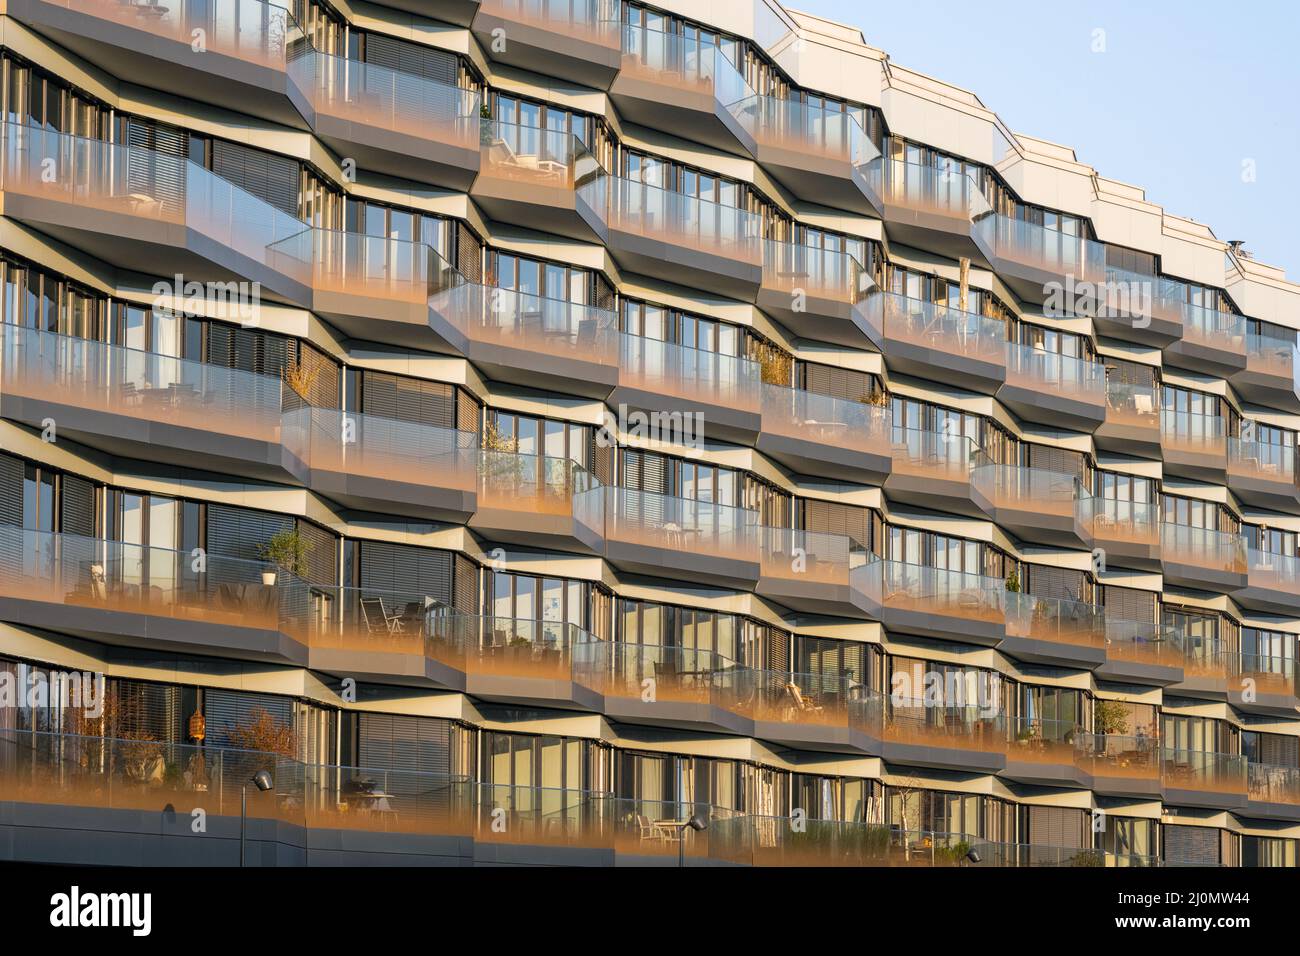 Facade of a modern apartment building with a lot of glass seen in Berlin, Germany Stock Photo